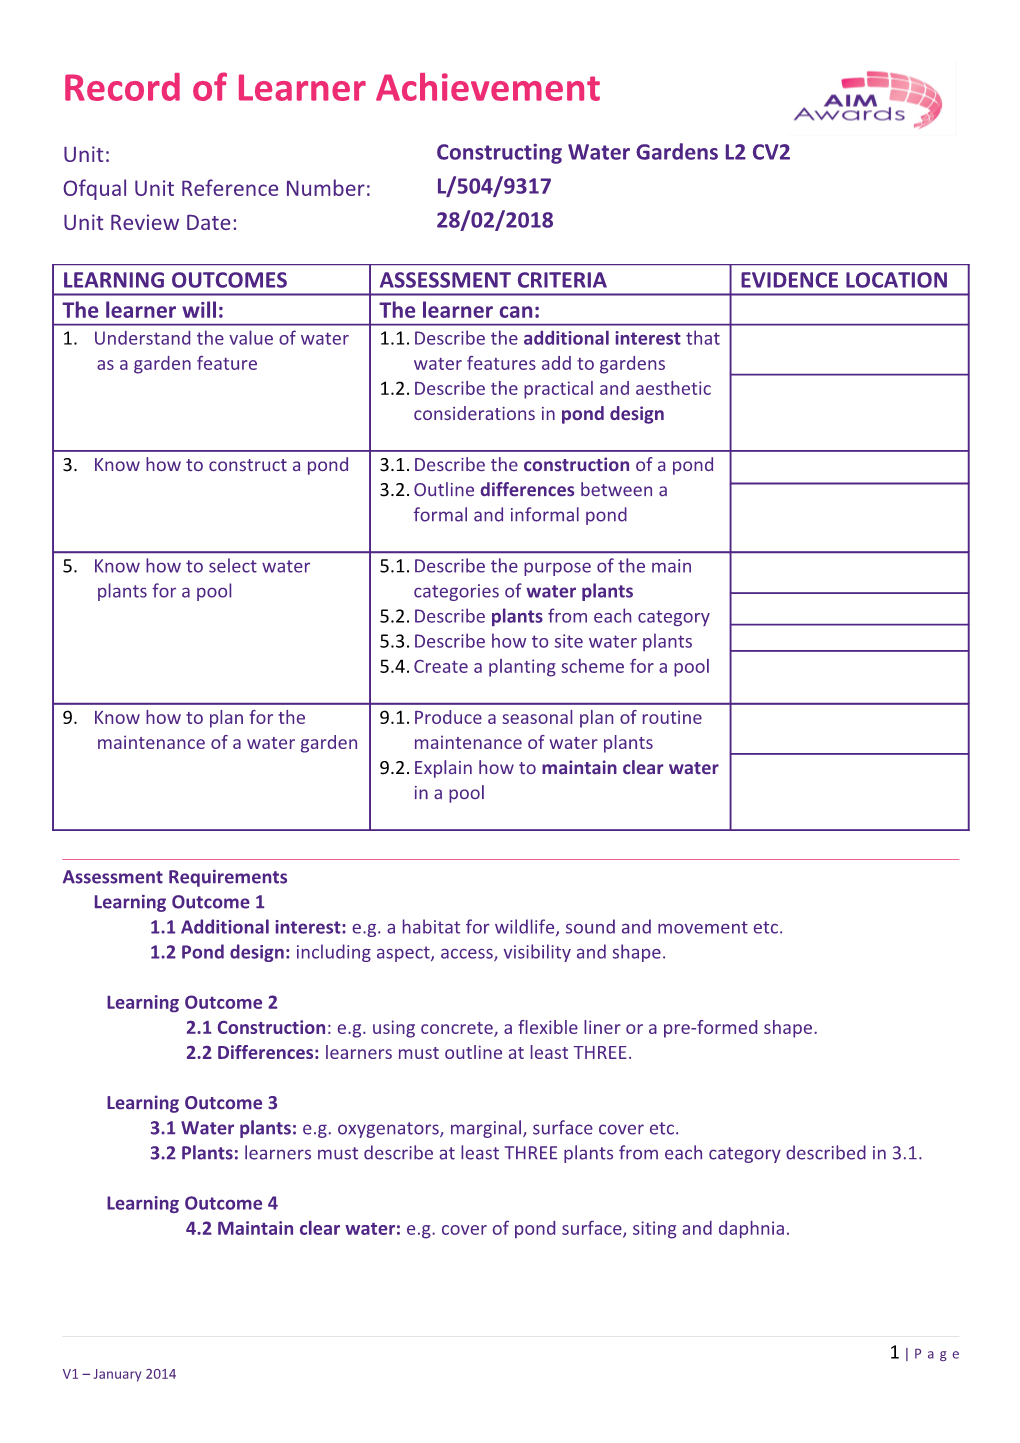 Assessment Requirements s2